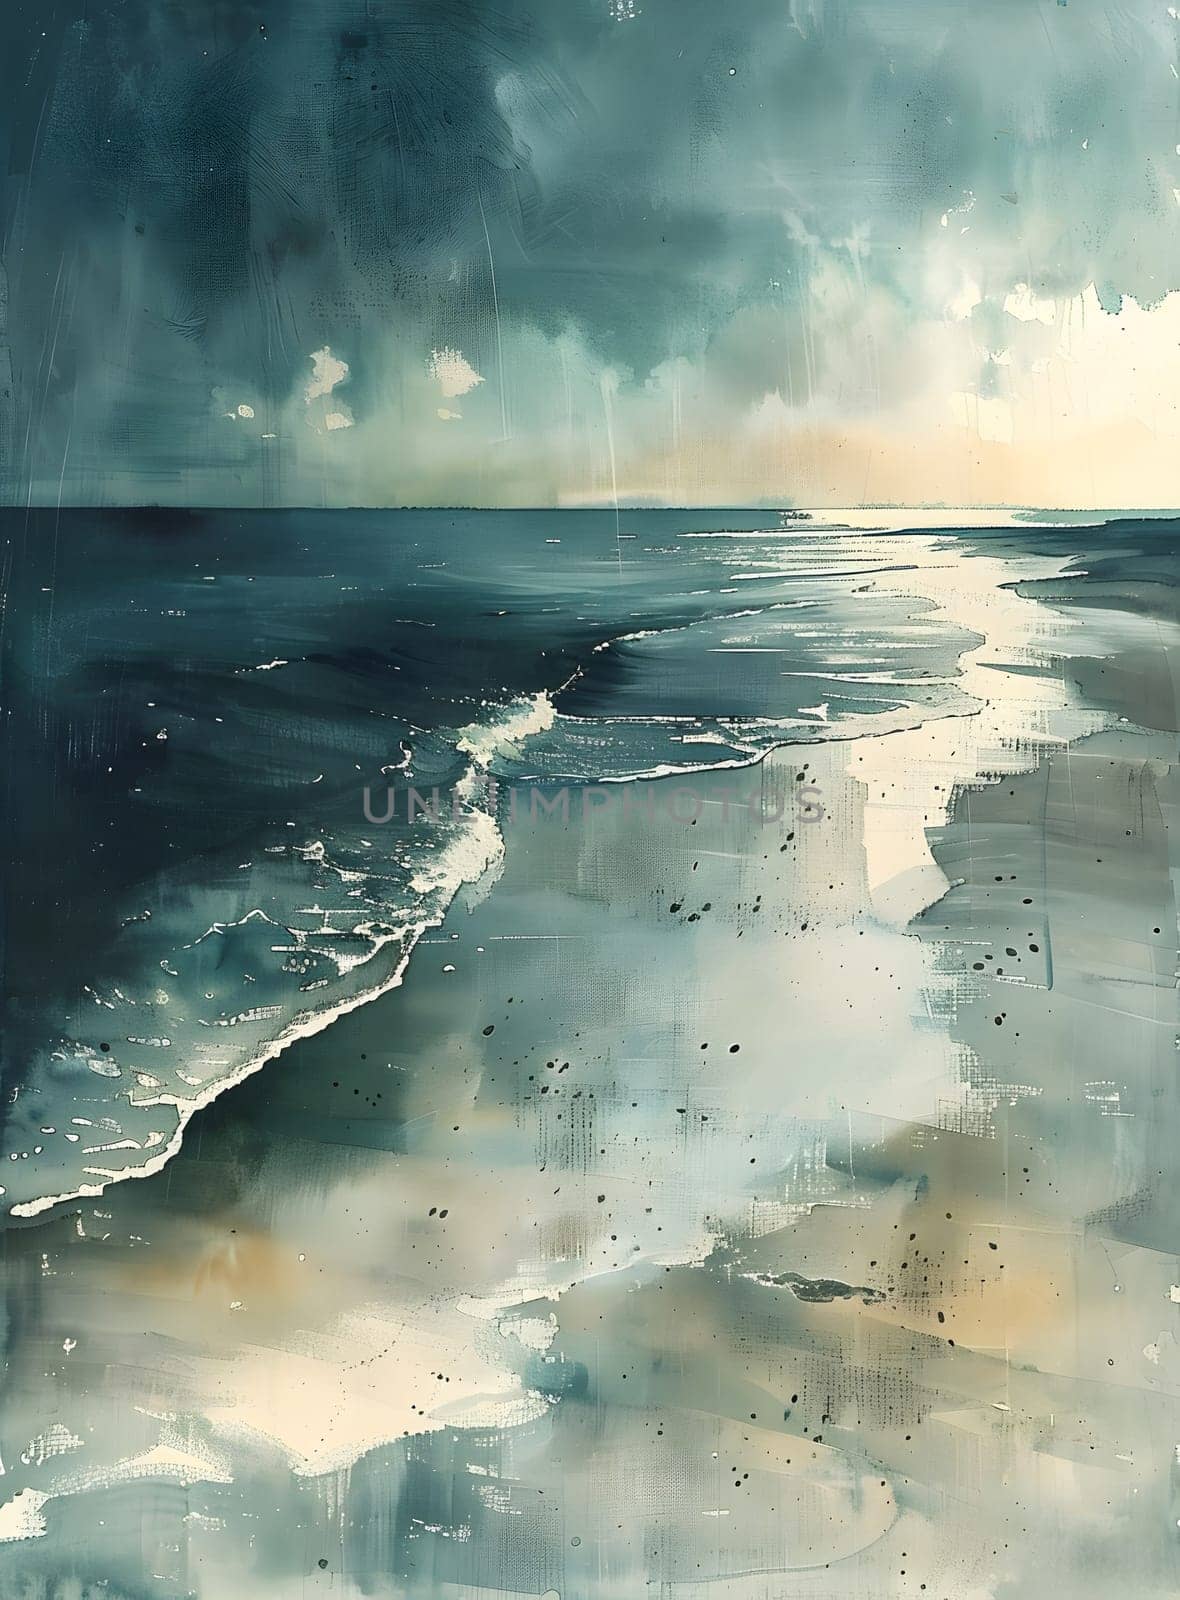 An art piece depicting a beach with crashing waves under a cloudy sky by Nadtochiy